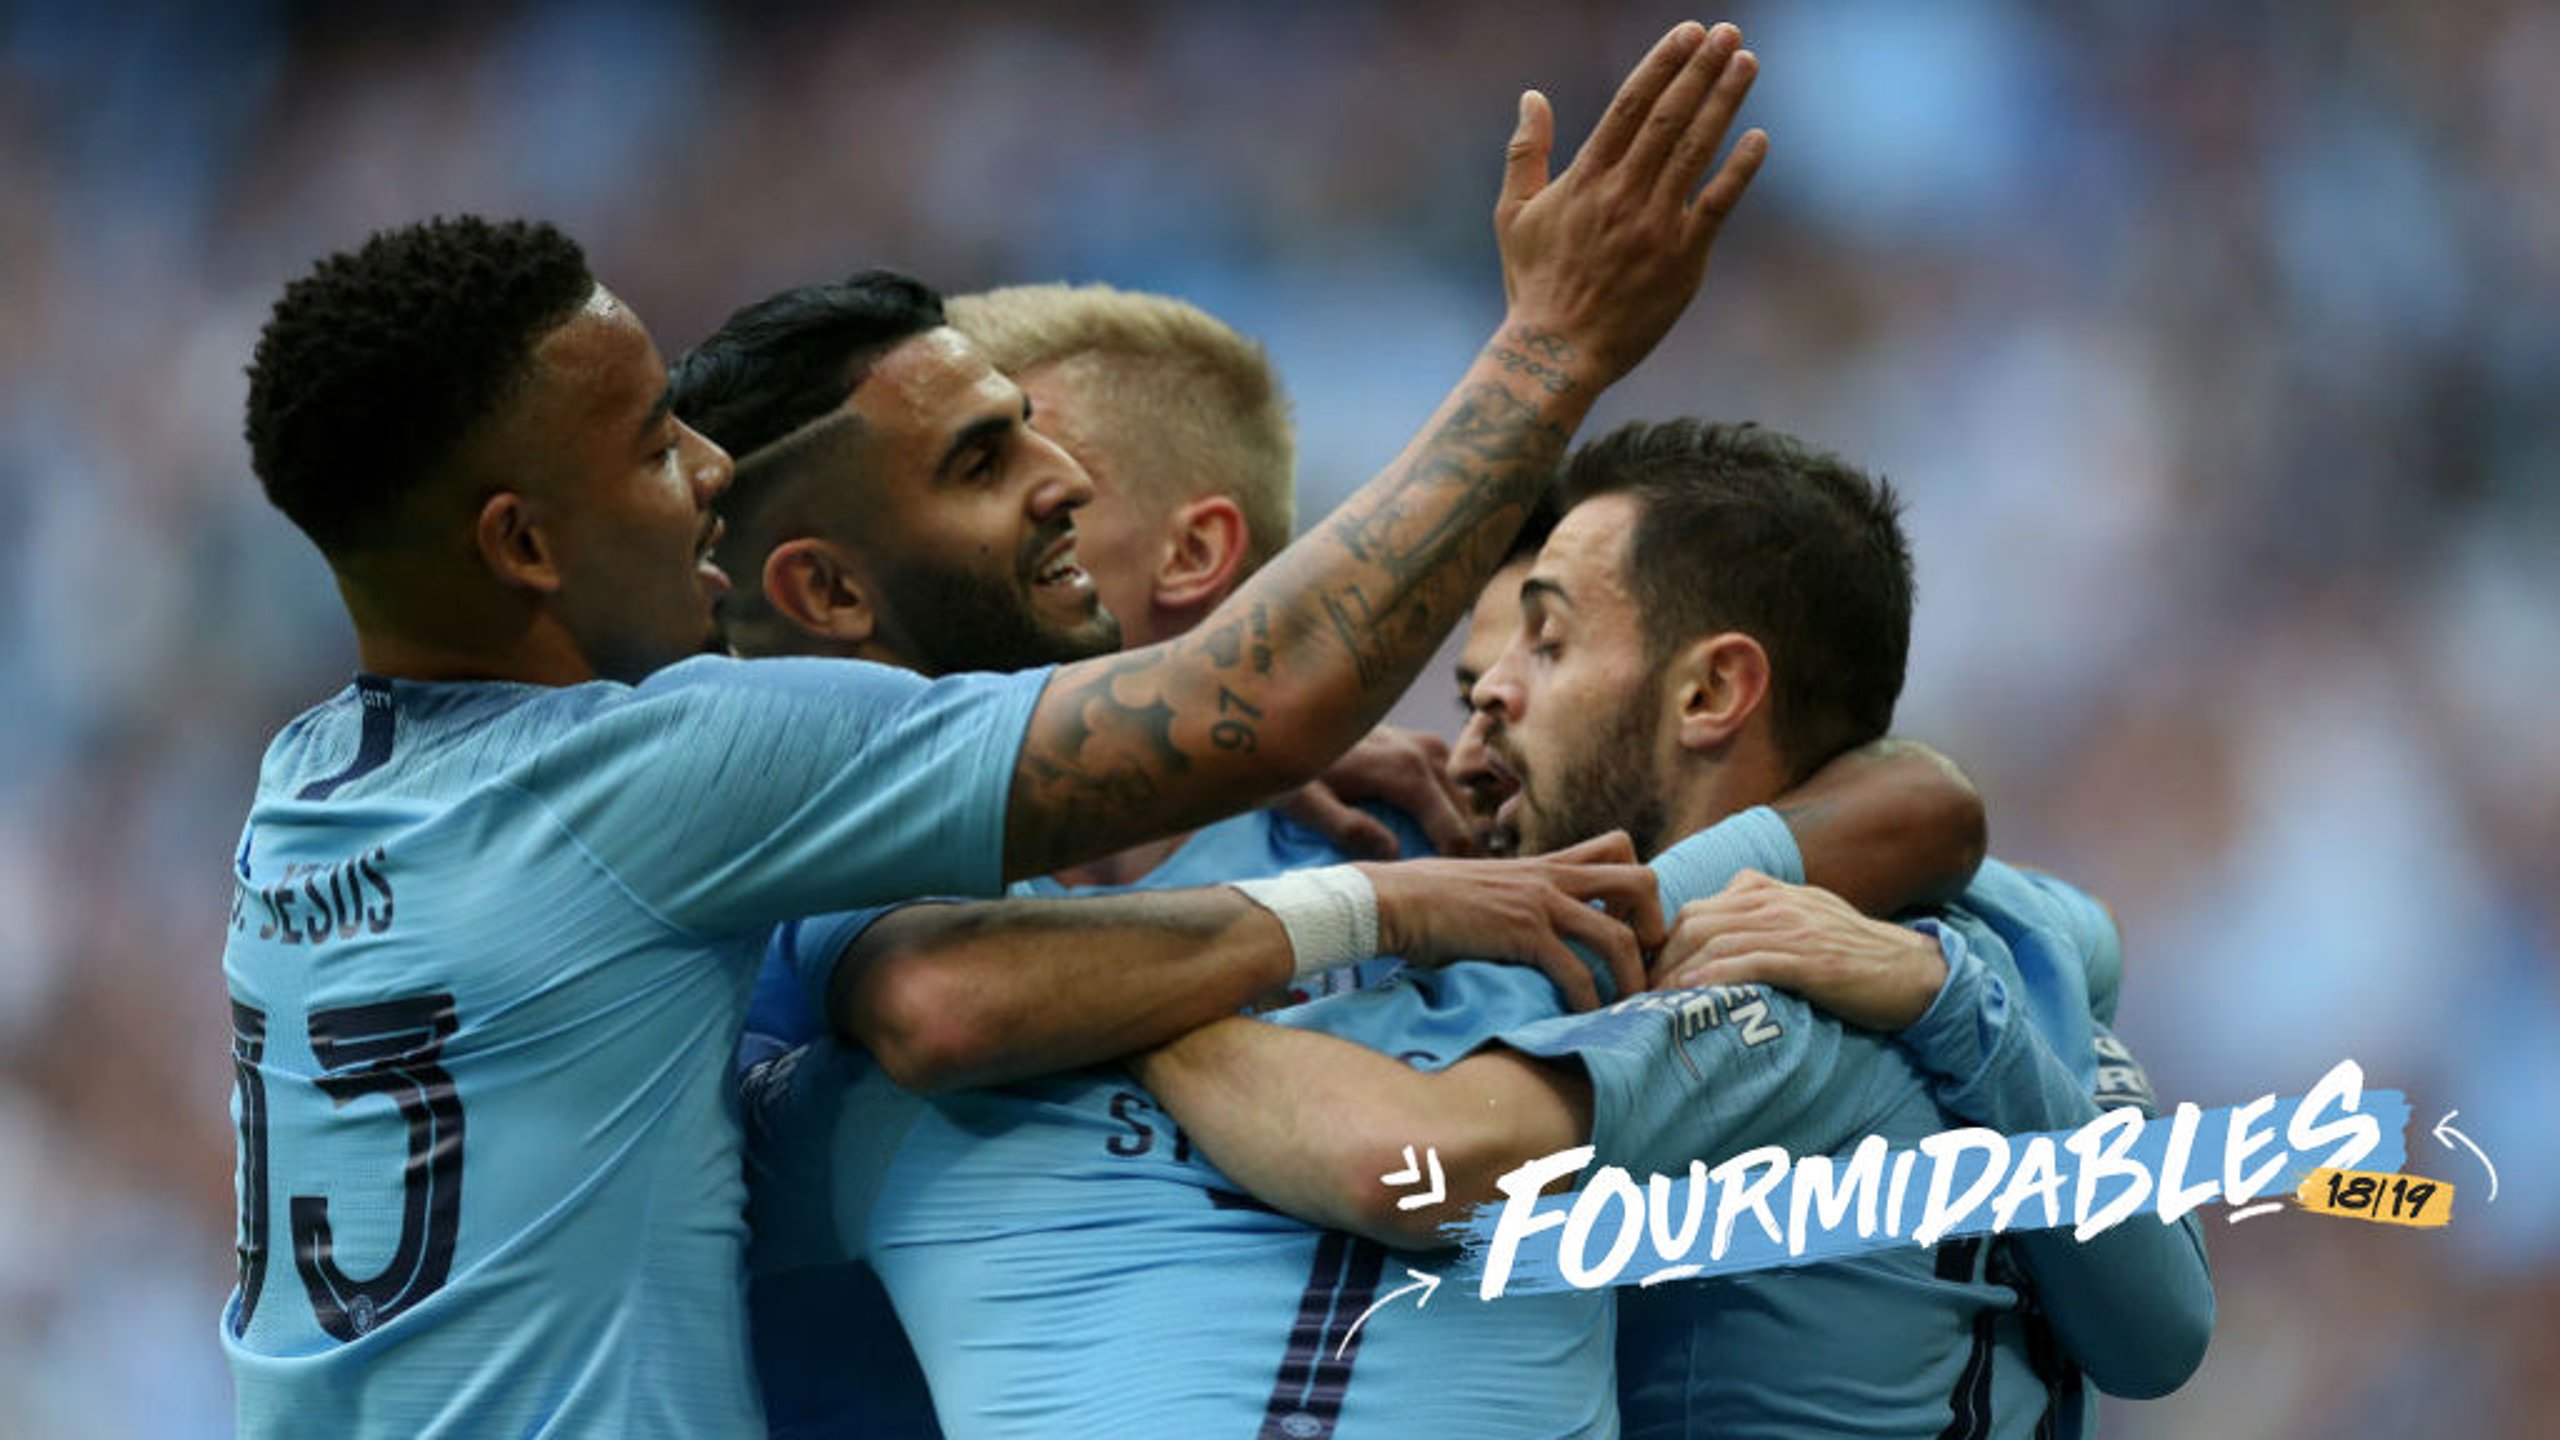 FOURMIDABLES: City have win the 2019 FA Cup and completed an historic season